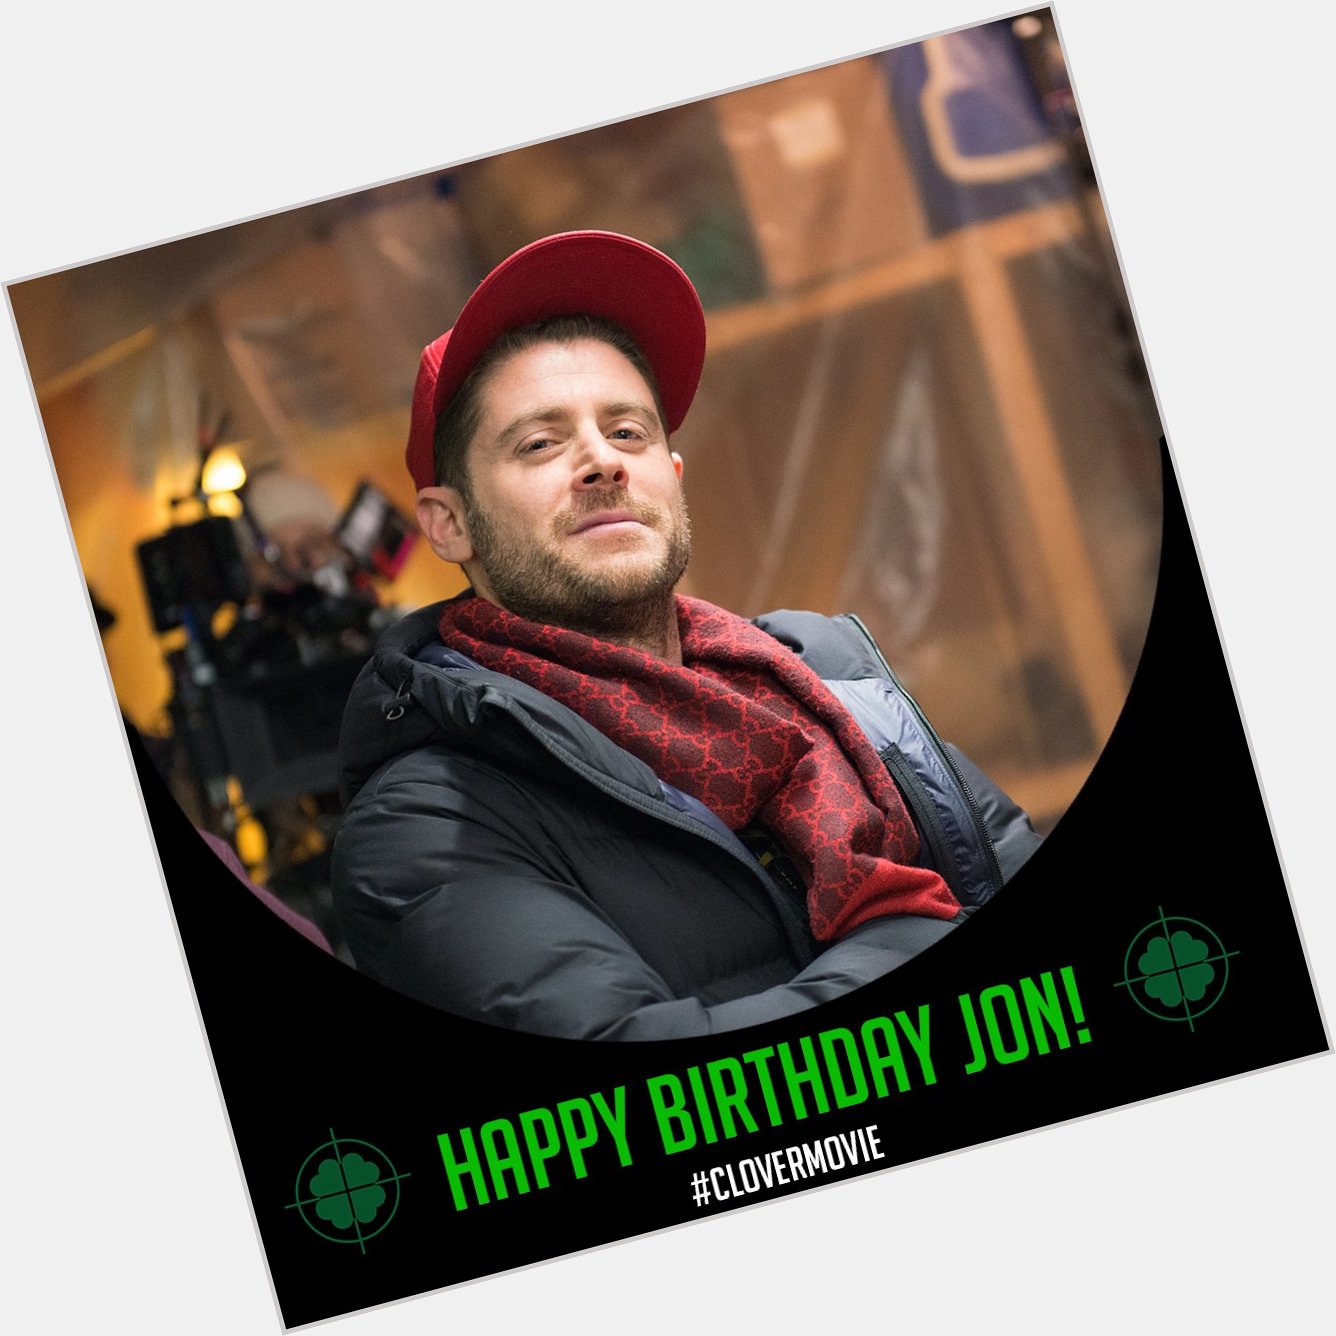 Wishing a very happy birthday to director and actor Jon Abrahams! 